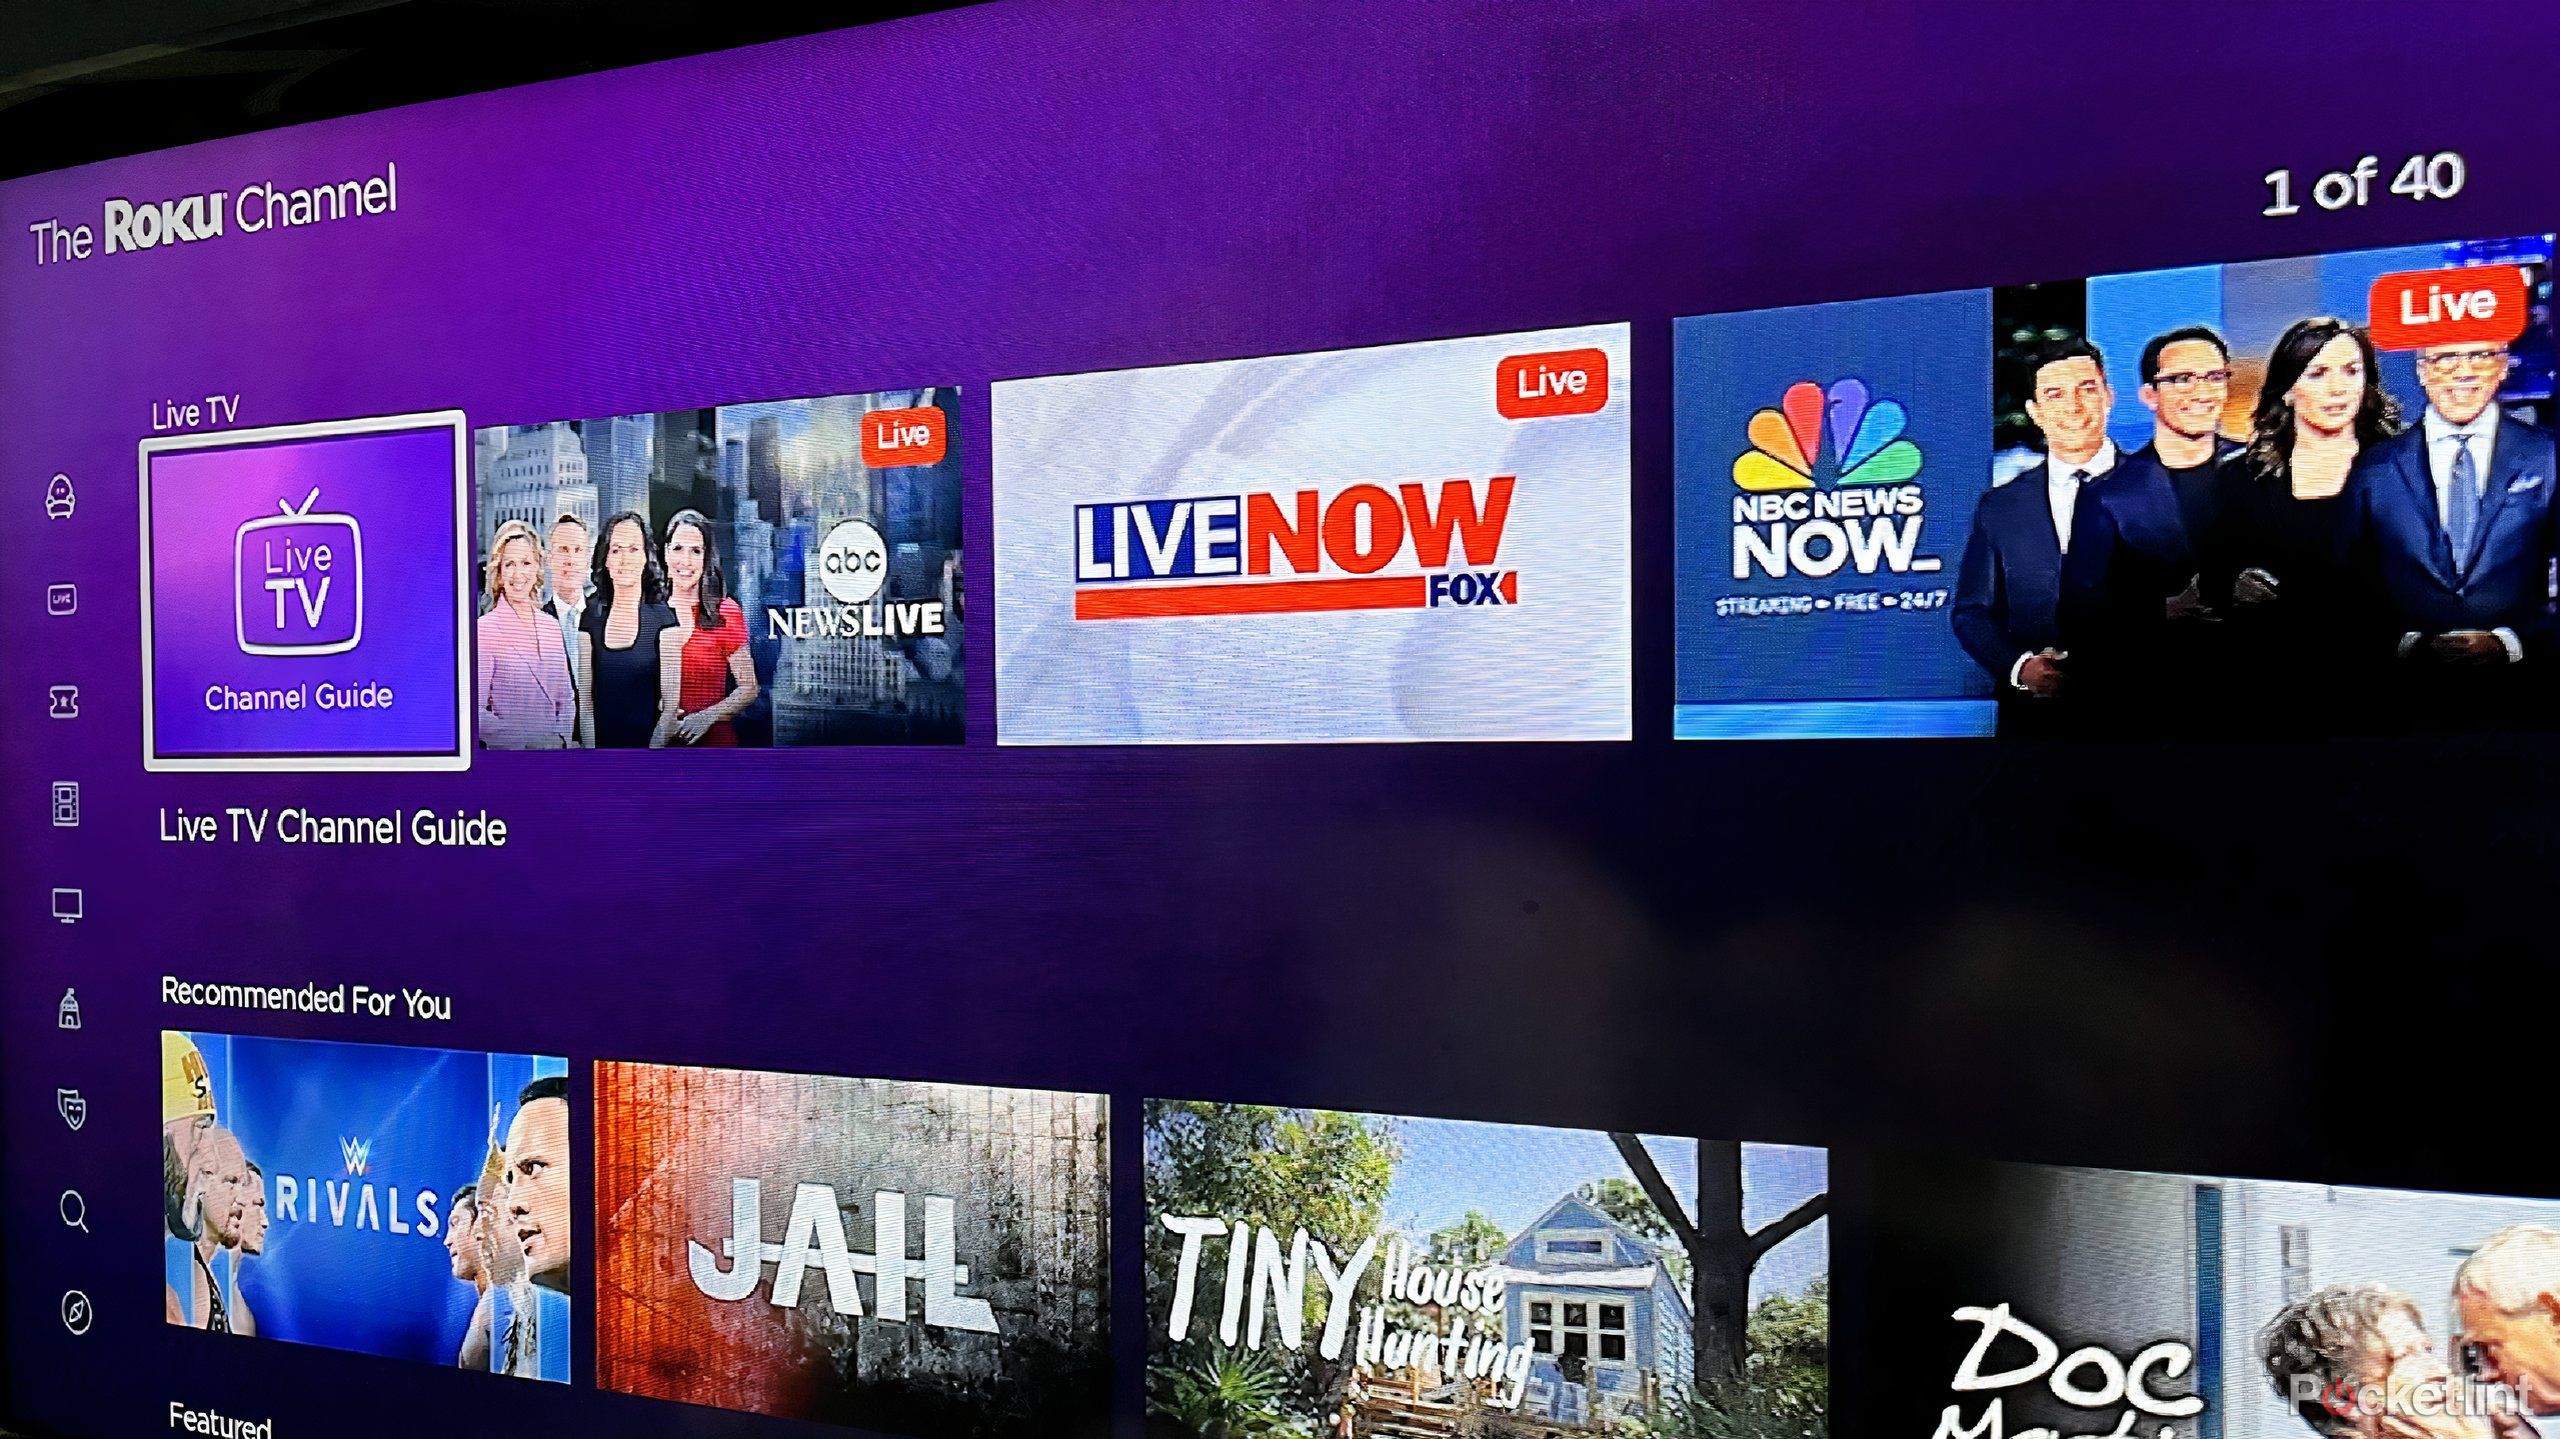 The Roku Channel interface